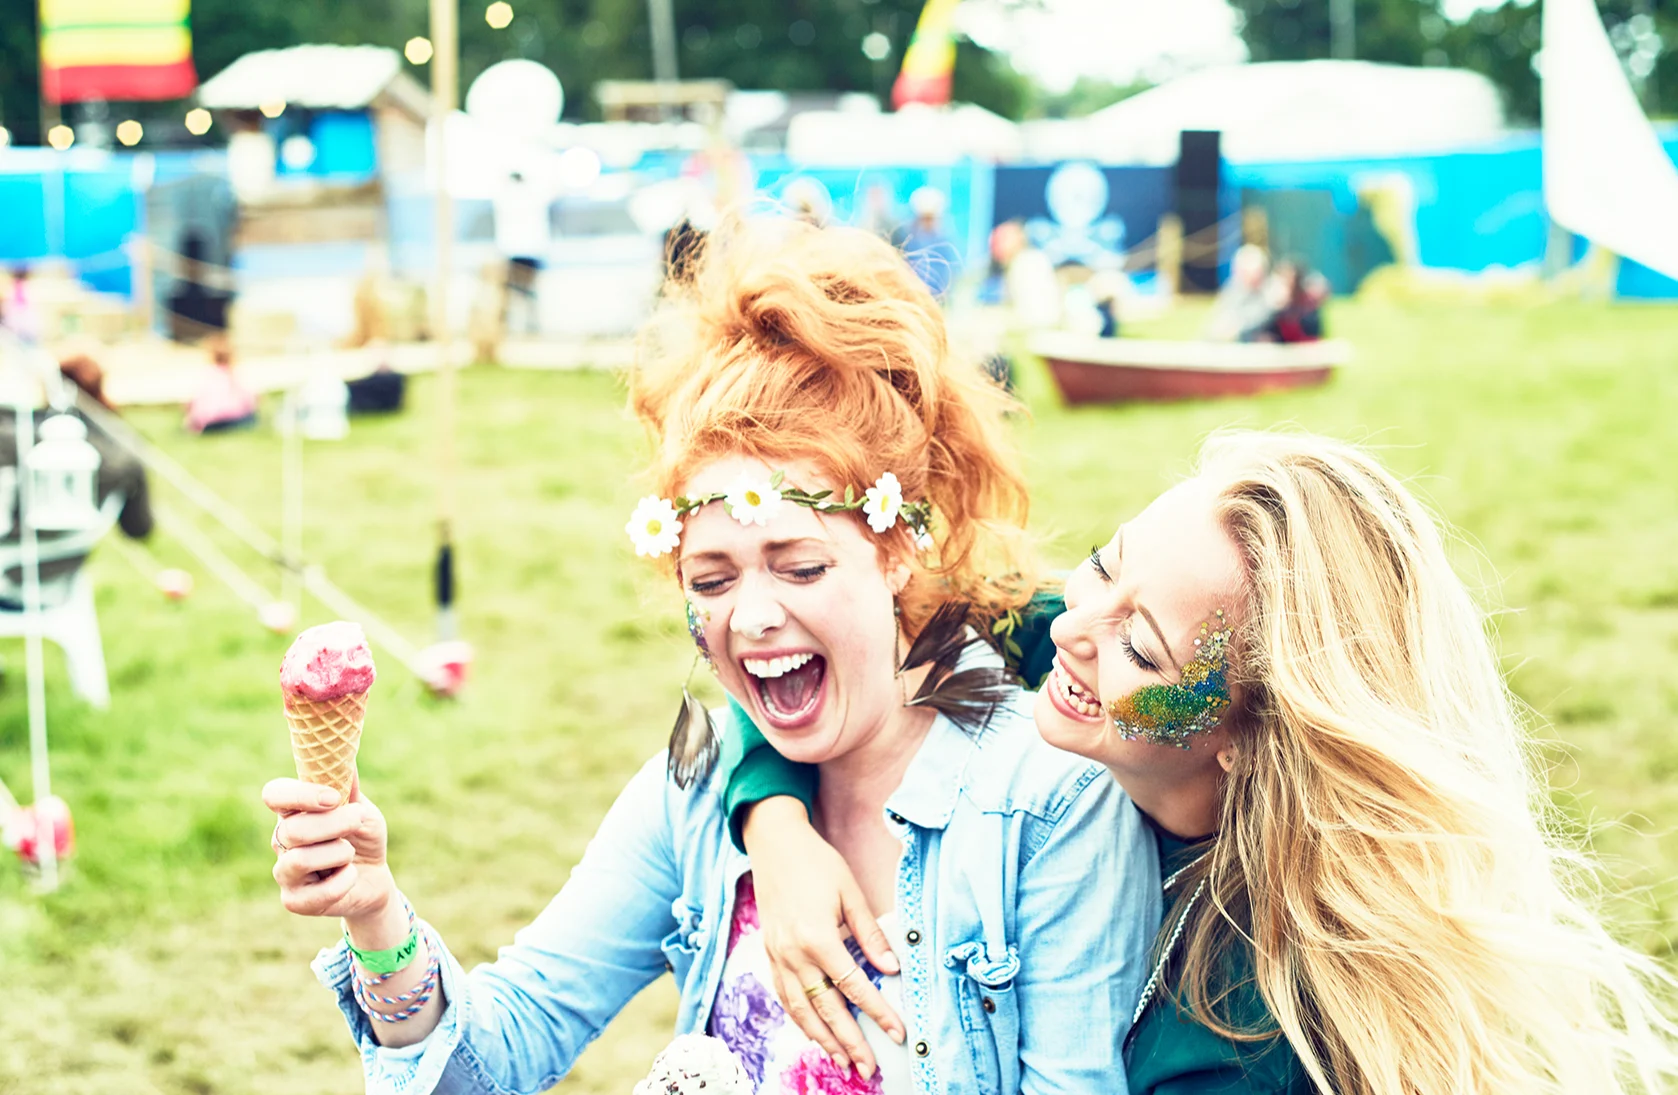 2 white young women sitting on the grass at a festival, they are laughing and one is holding an ice cream cone